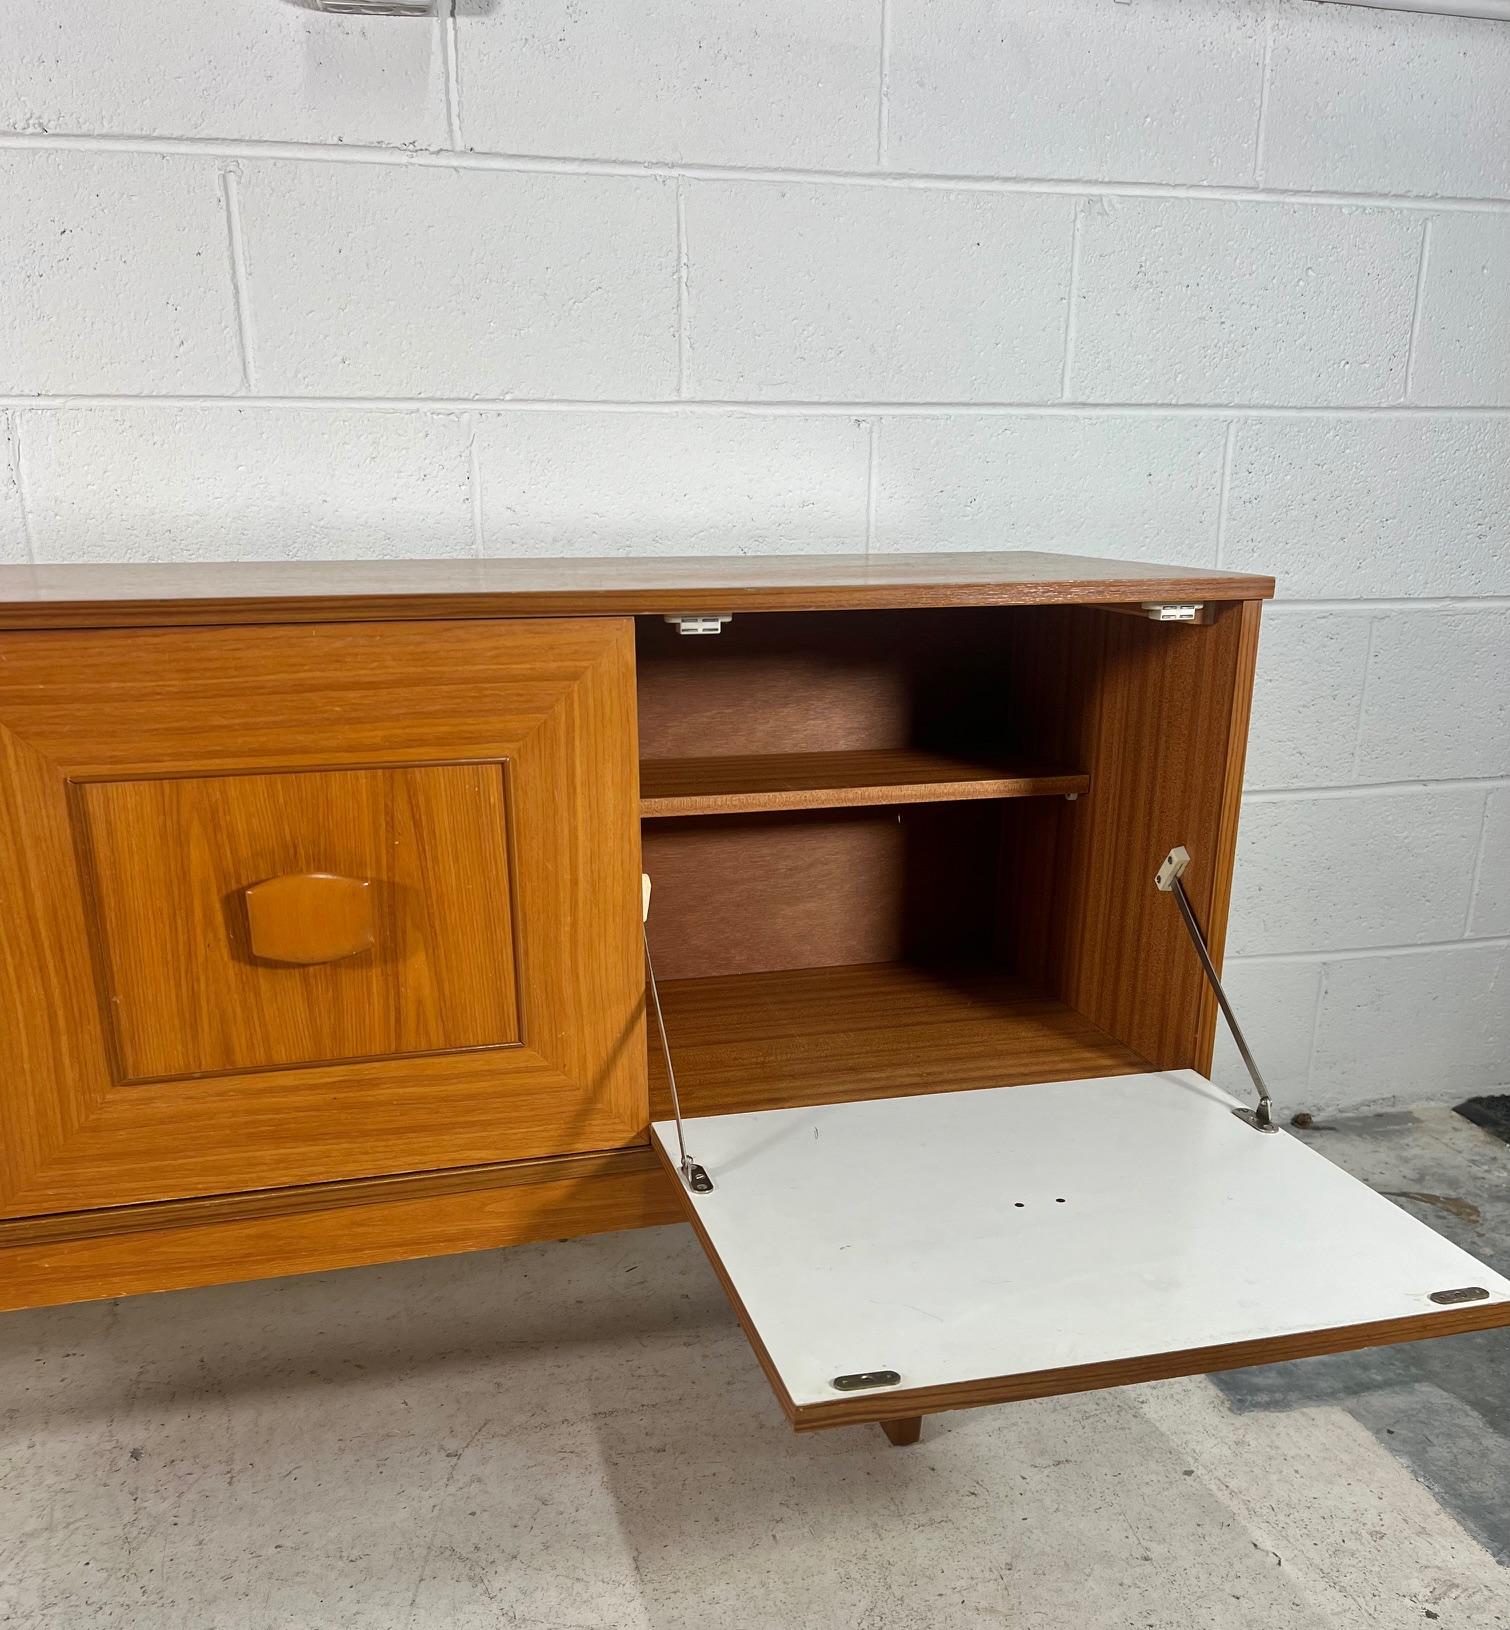 Outstanding teak credenza by Stonehill. Model Stateroom. Featuring 3 drawers on the left, drop down door bar on the right and a cabinet with removable shelves in the middle.
Very good condition. Minor marks on the top. A chip on the left top corner